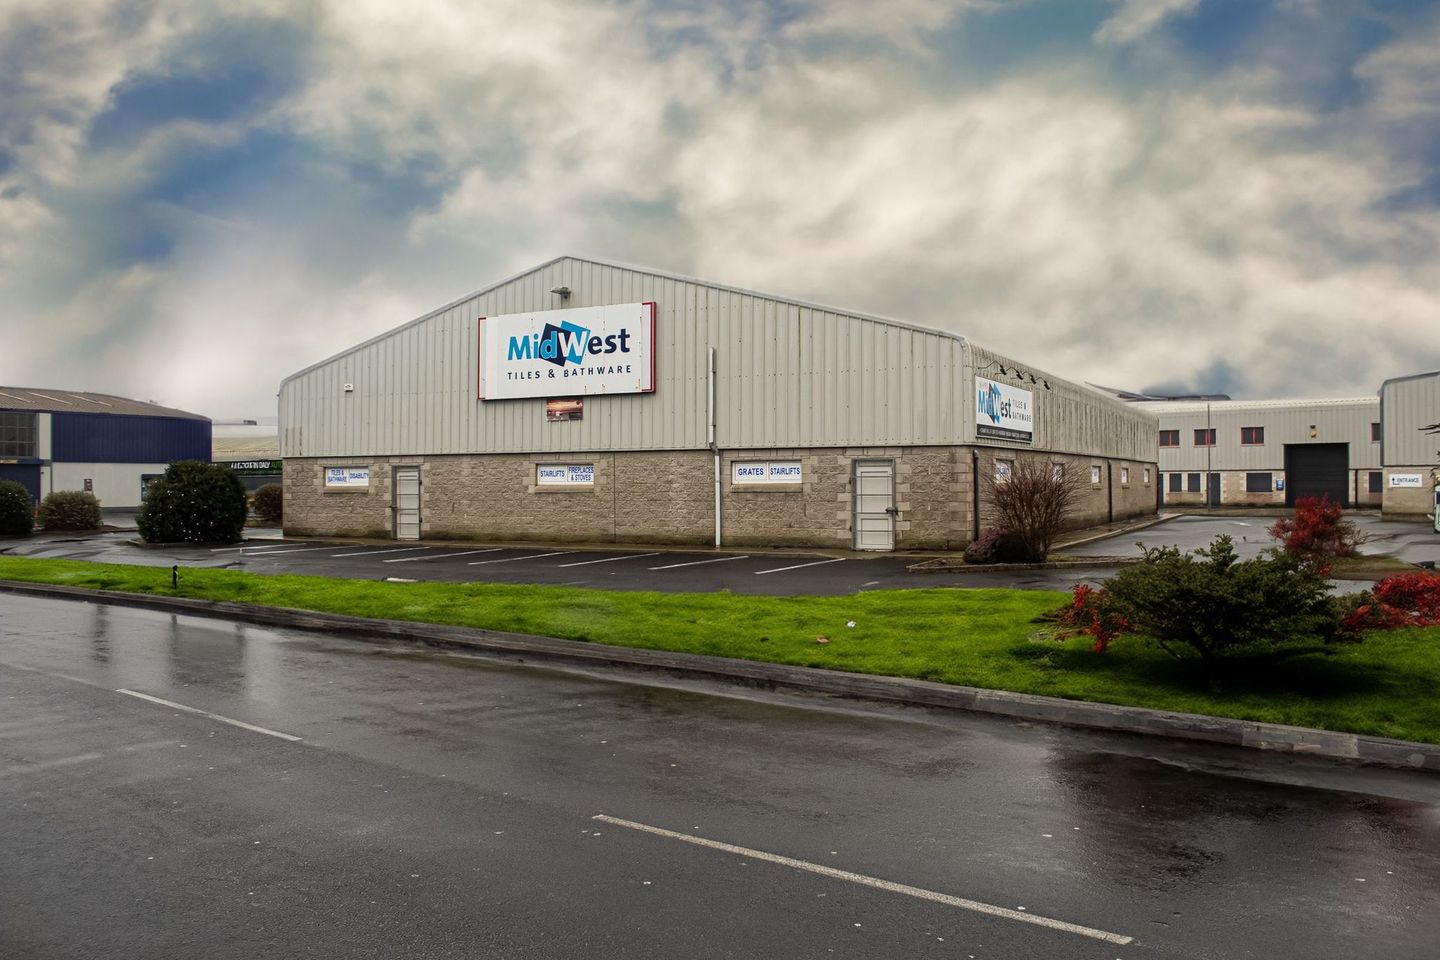 Quin Road Business Park ,Ennis, Quin, Co. Clare, V95TY72